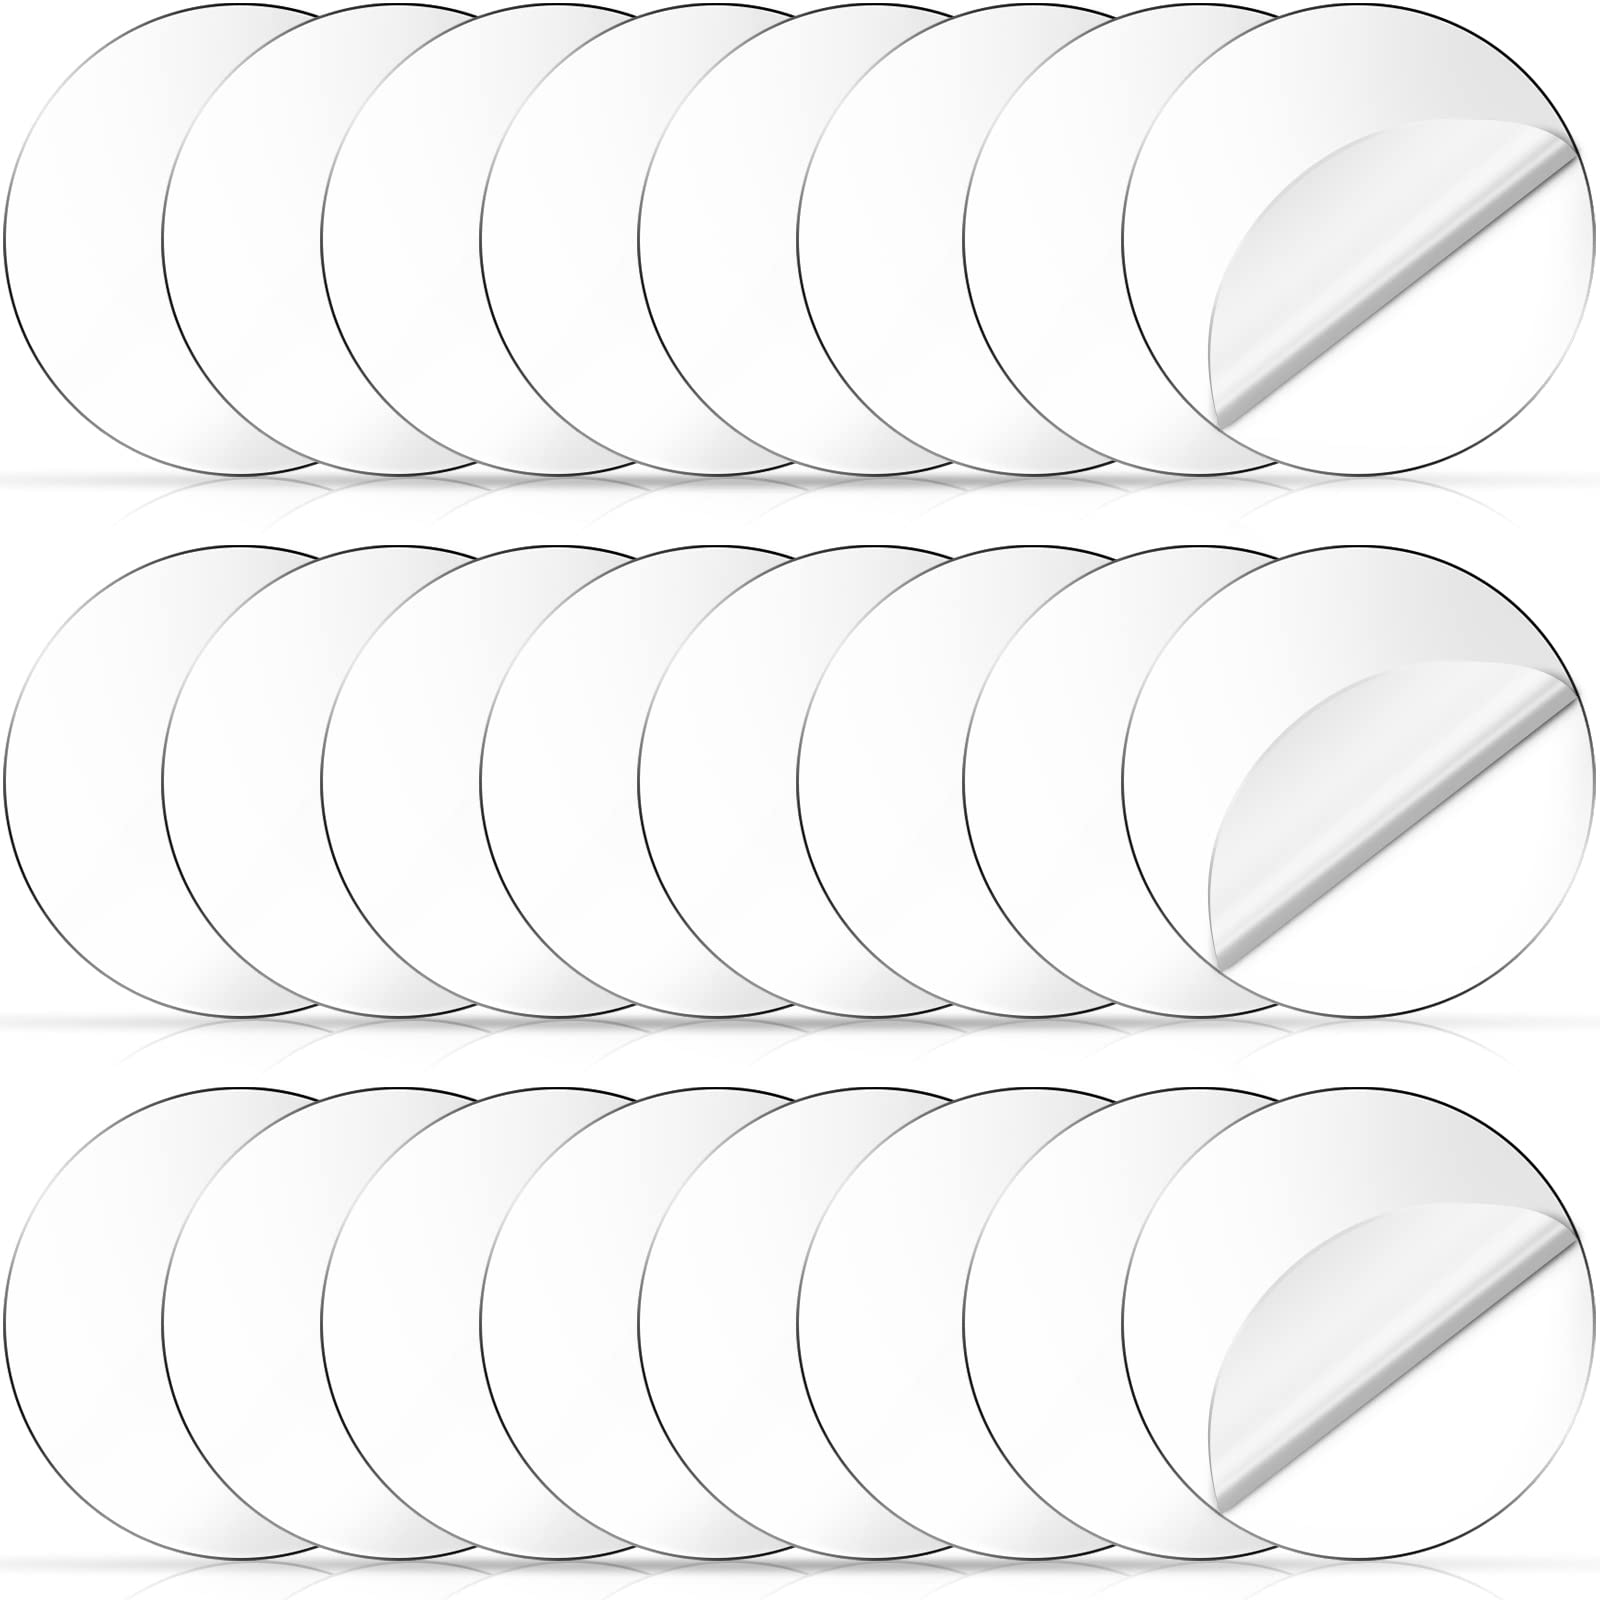 Gartful Clear Acrylic Discs - 2 inch, 24 Pieces Round Acrylic Sheets, 1/25  Thick Transparent Plexiglass Circle Panel, Plastic Disk For Signs, Craft  Project, Painting, Milestone Markers, DIY Ornament 0.04 Thick - 2 inch /  24x